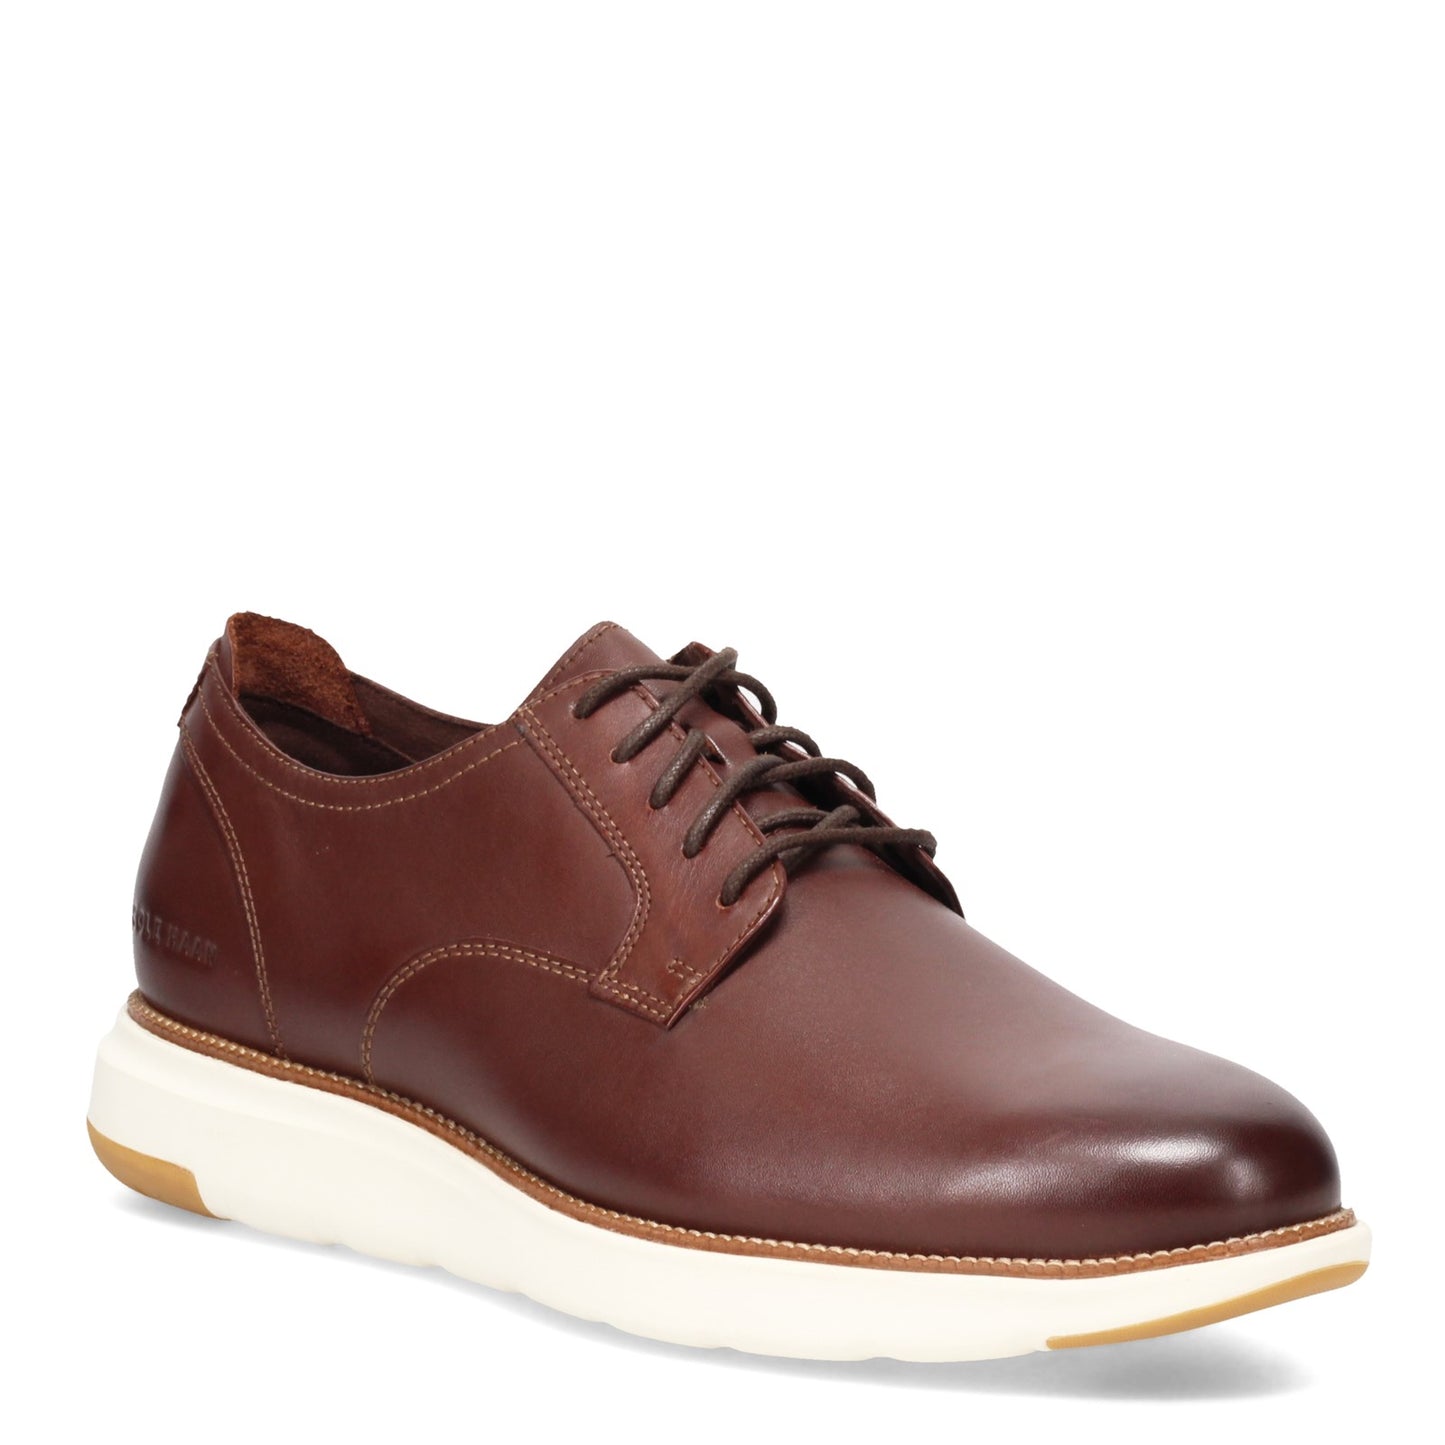 Cole Haan Men's Leather Grand Atlantic Oxford - Chestnut/Ivory